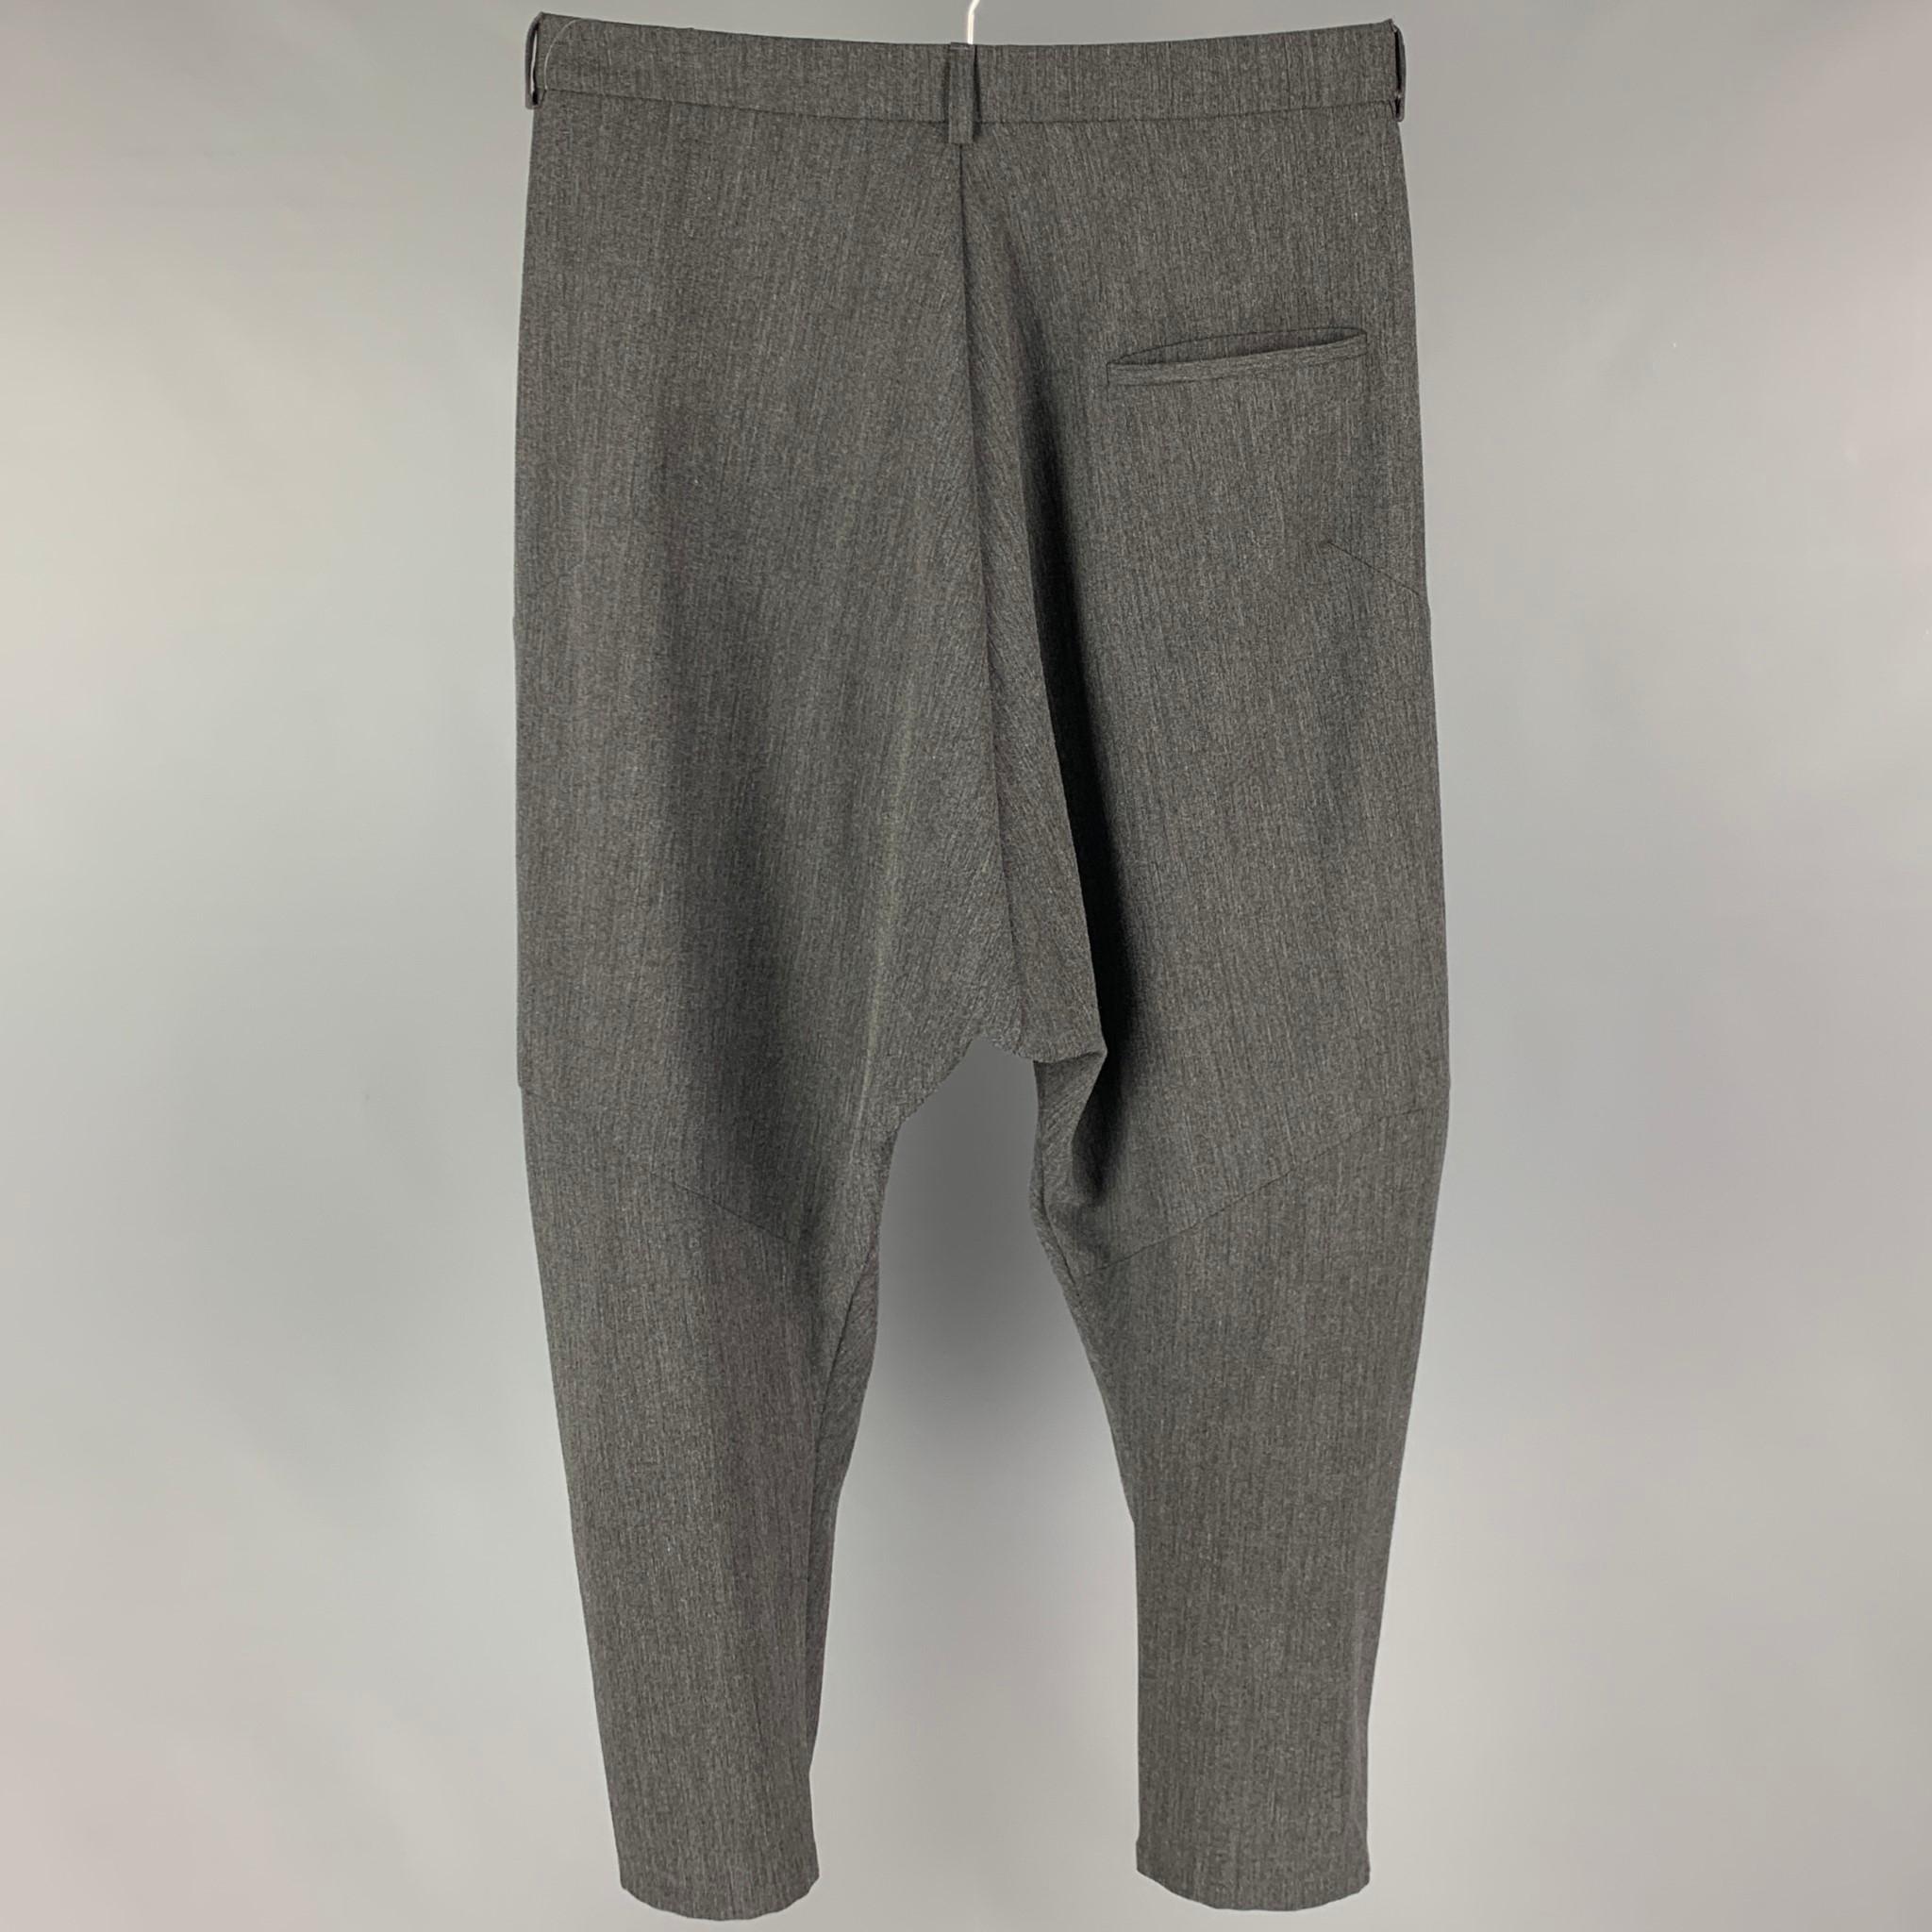 HENRIK VIBSKOV dress pants comes in a gray polyester featuring a pleated style, drop-crotch, and a zip fly closure. Made in Portugal. 

Very Good Pre-Owned Condition.
Marked: M

Measurements:

Waist: 32 in.
Rise: 18.5 in.
Inseam: 23 in. 